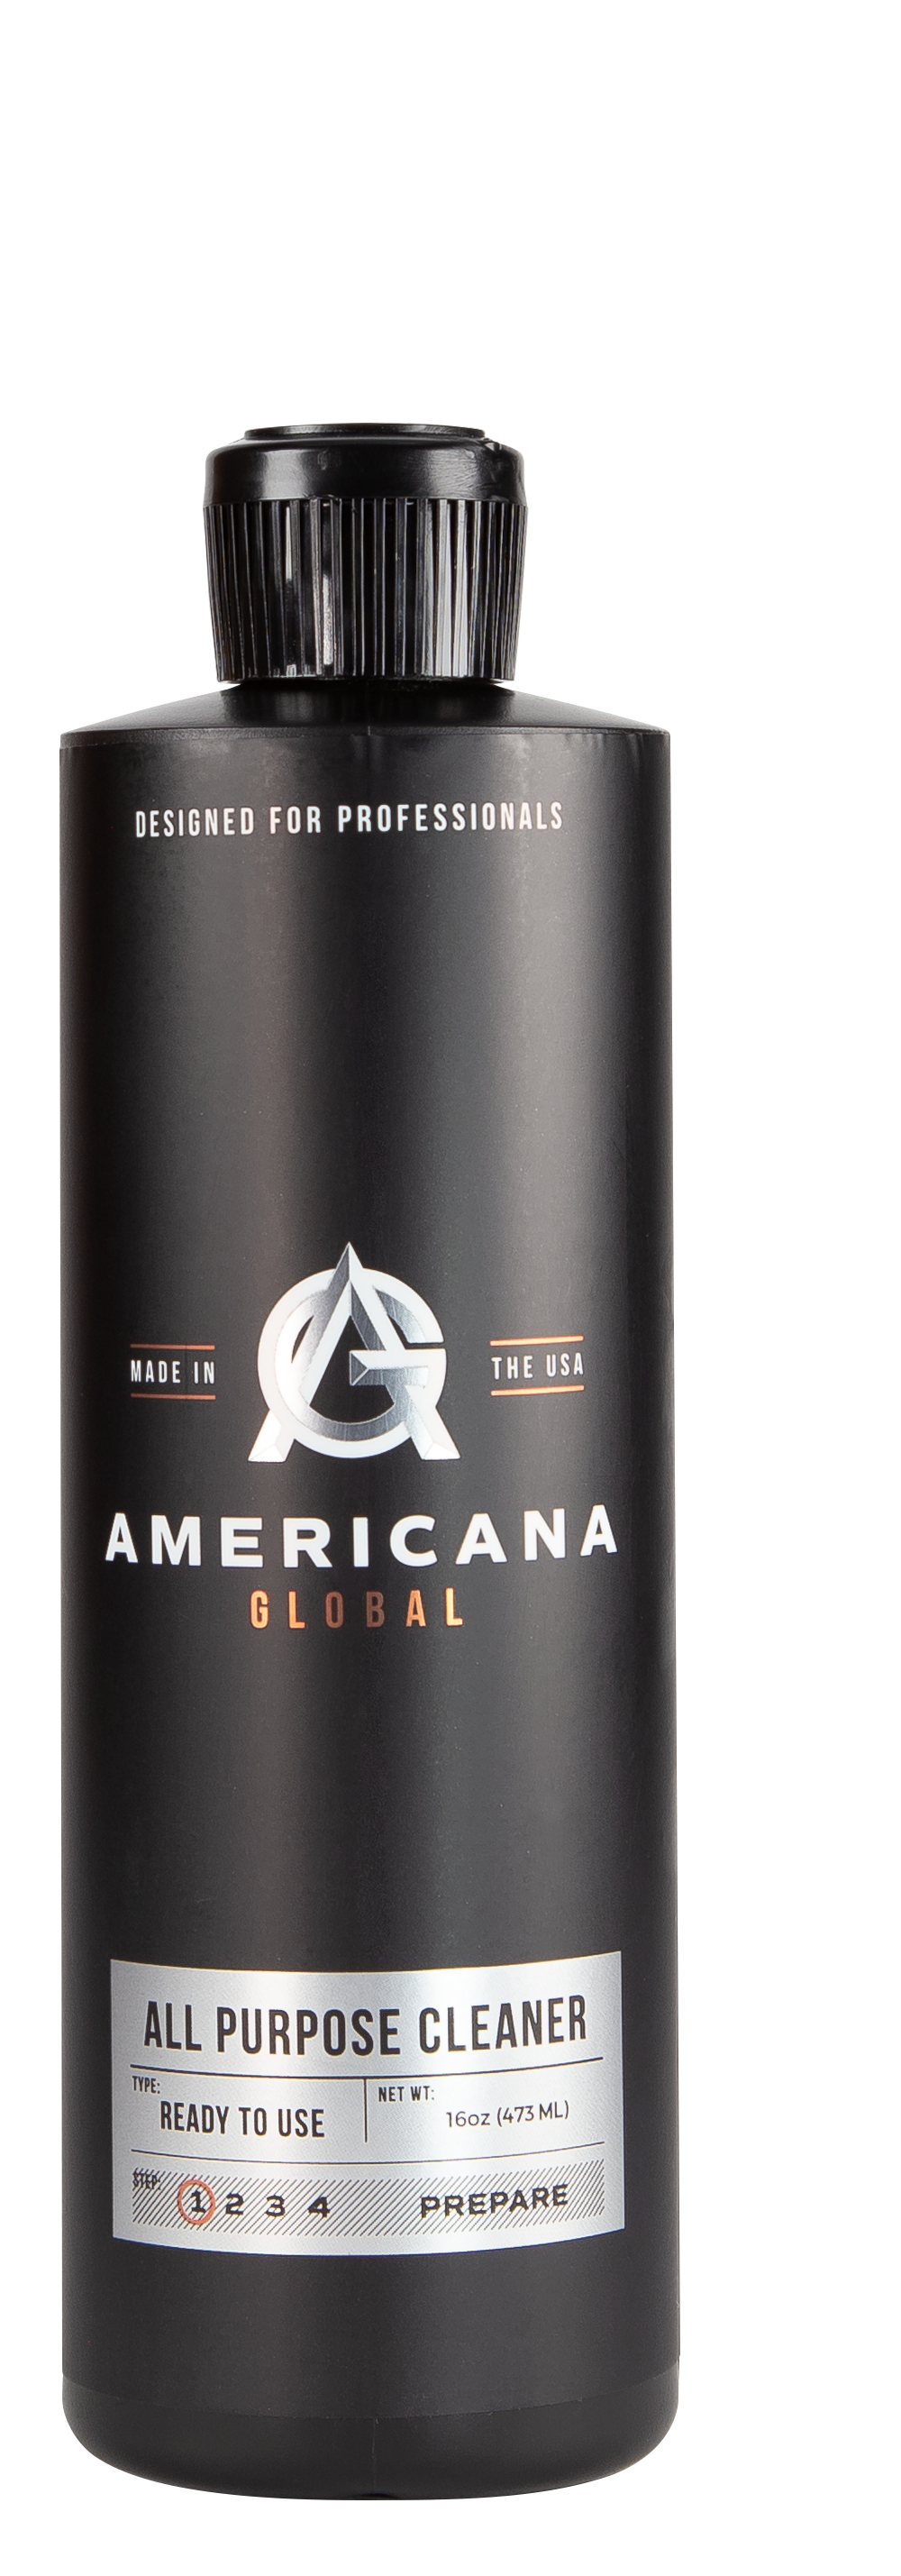 Americana Global - All Purpose Cleaner (Concentrated)